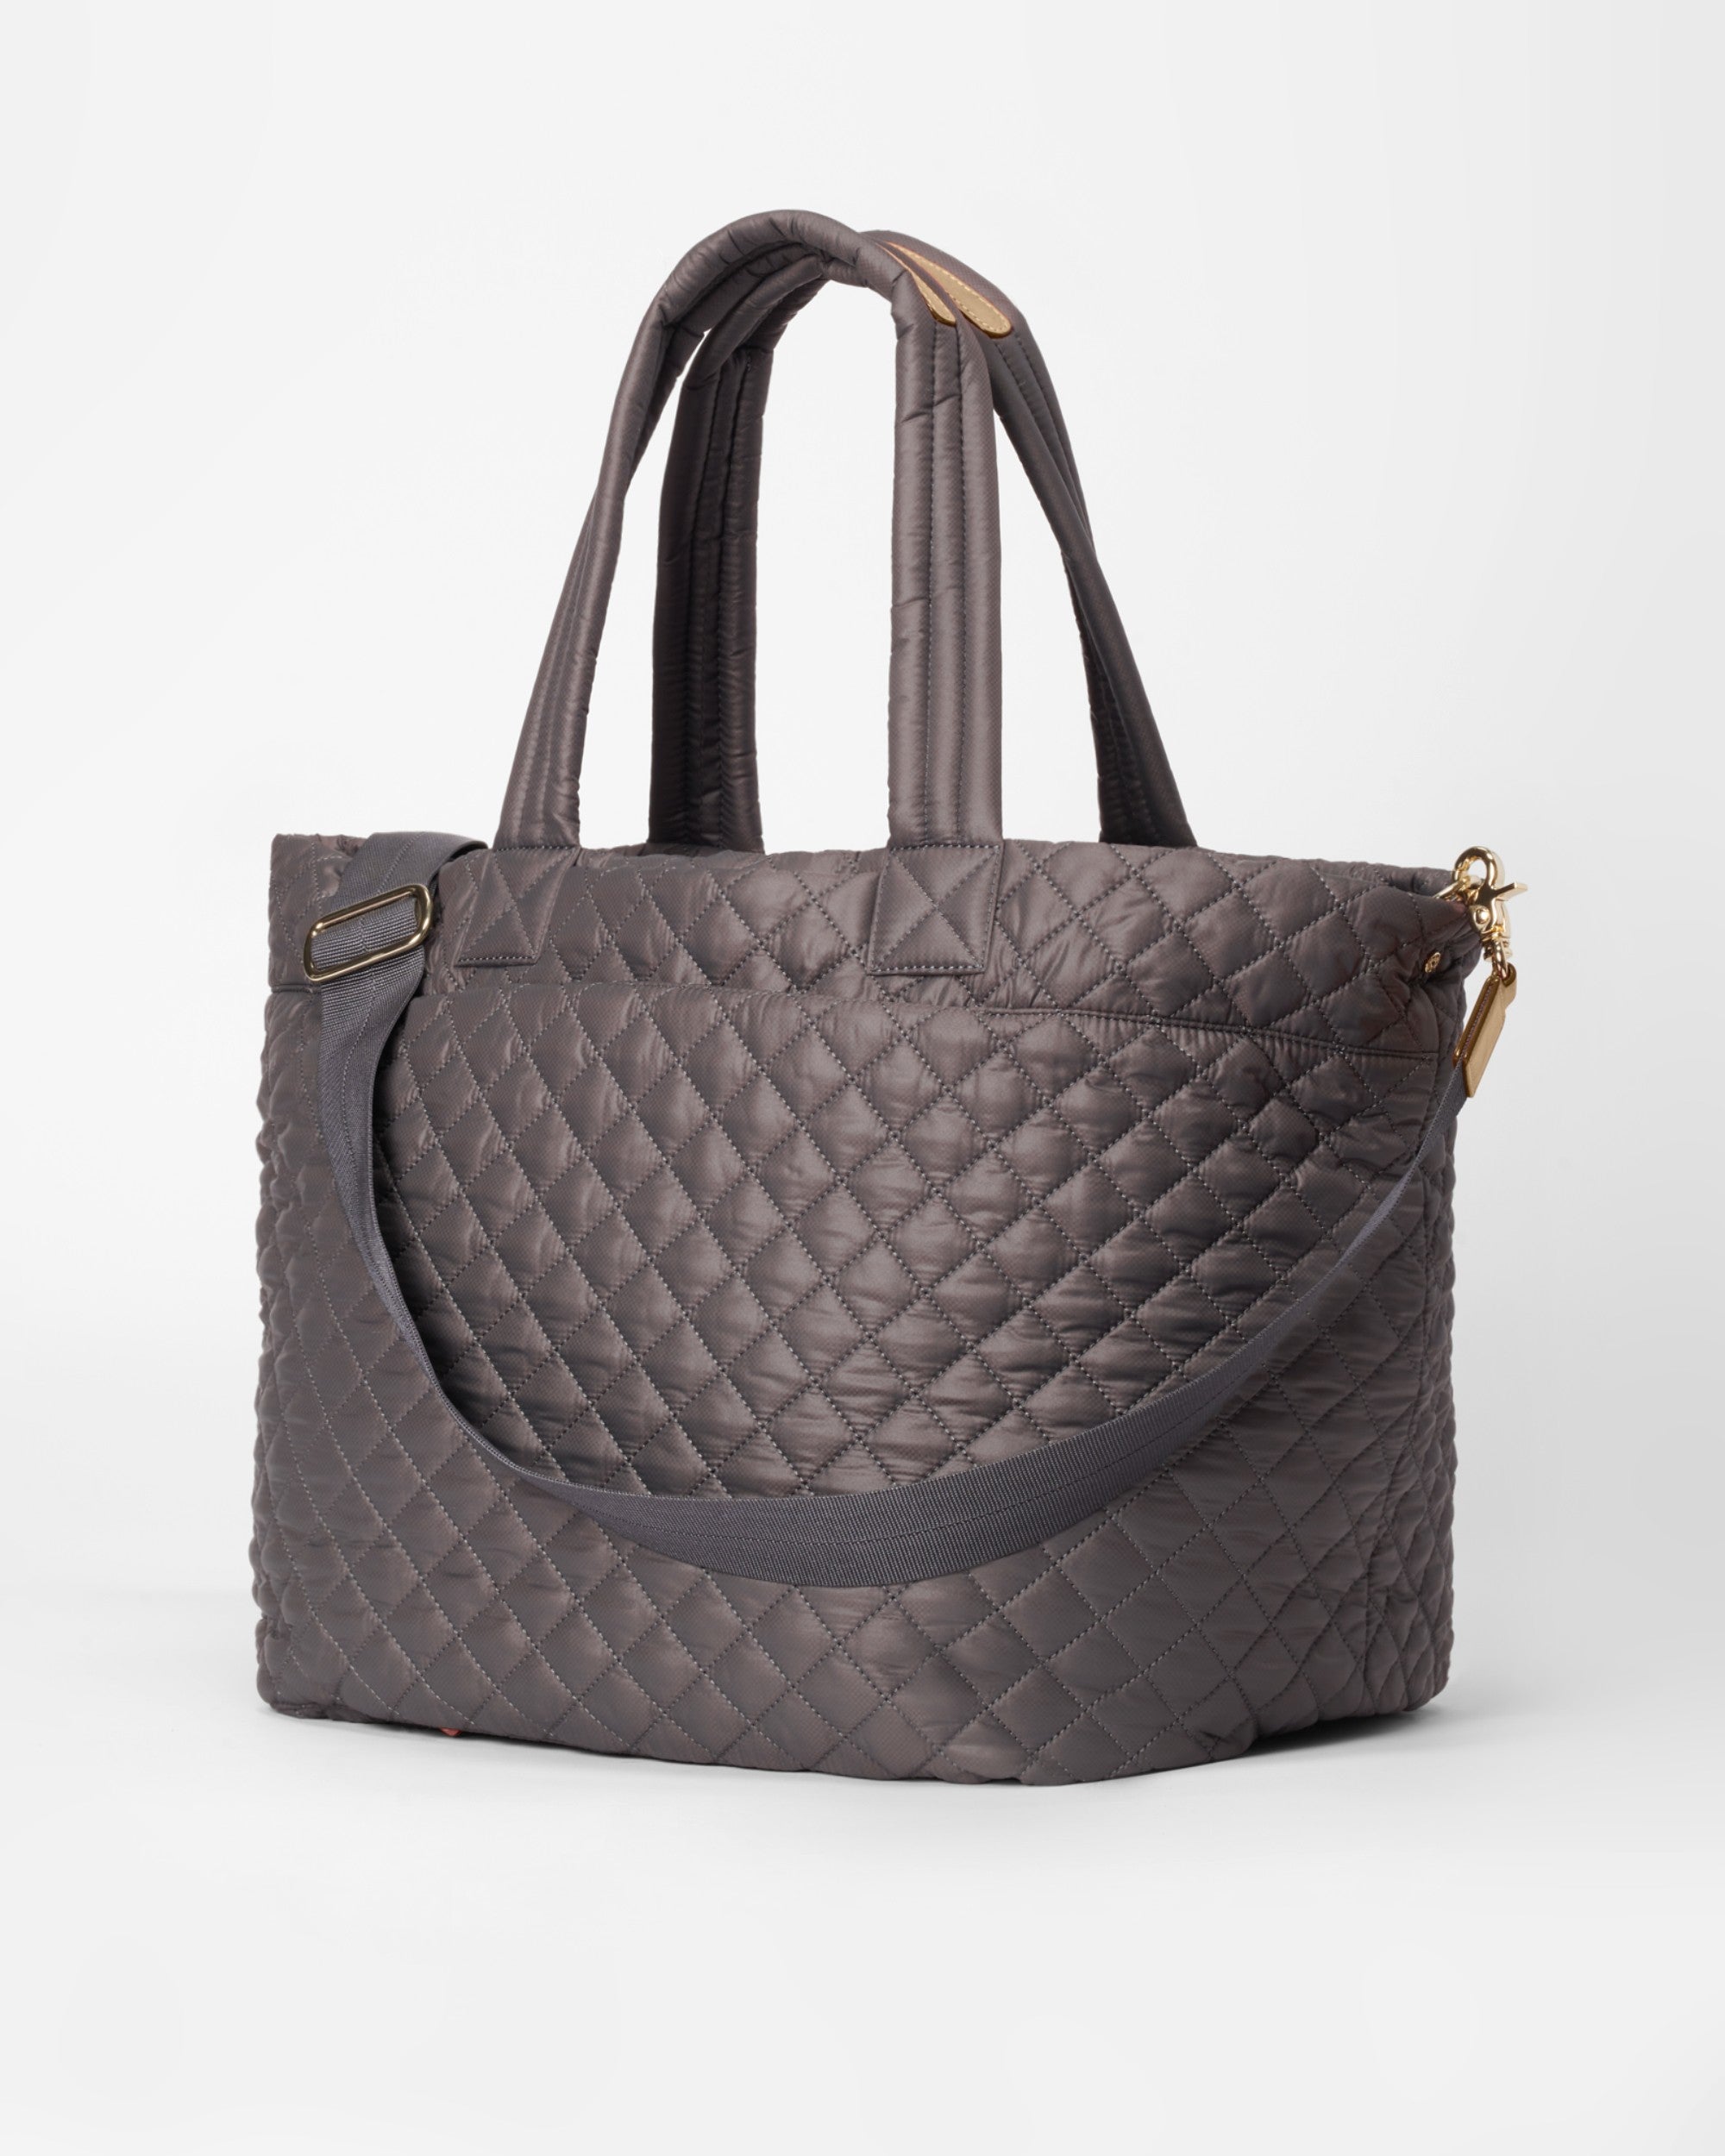 MZ Wallace Black Large Metro Tote Deluxe